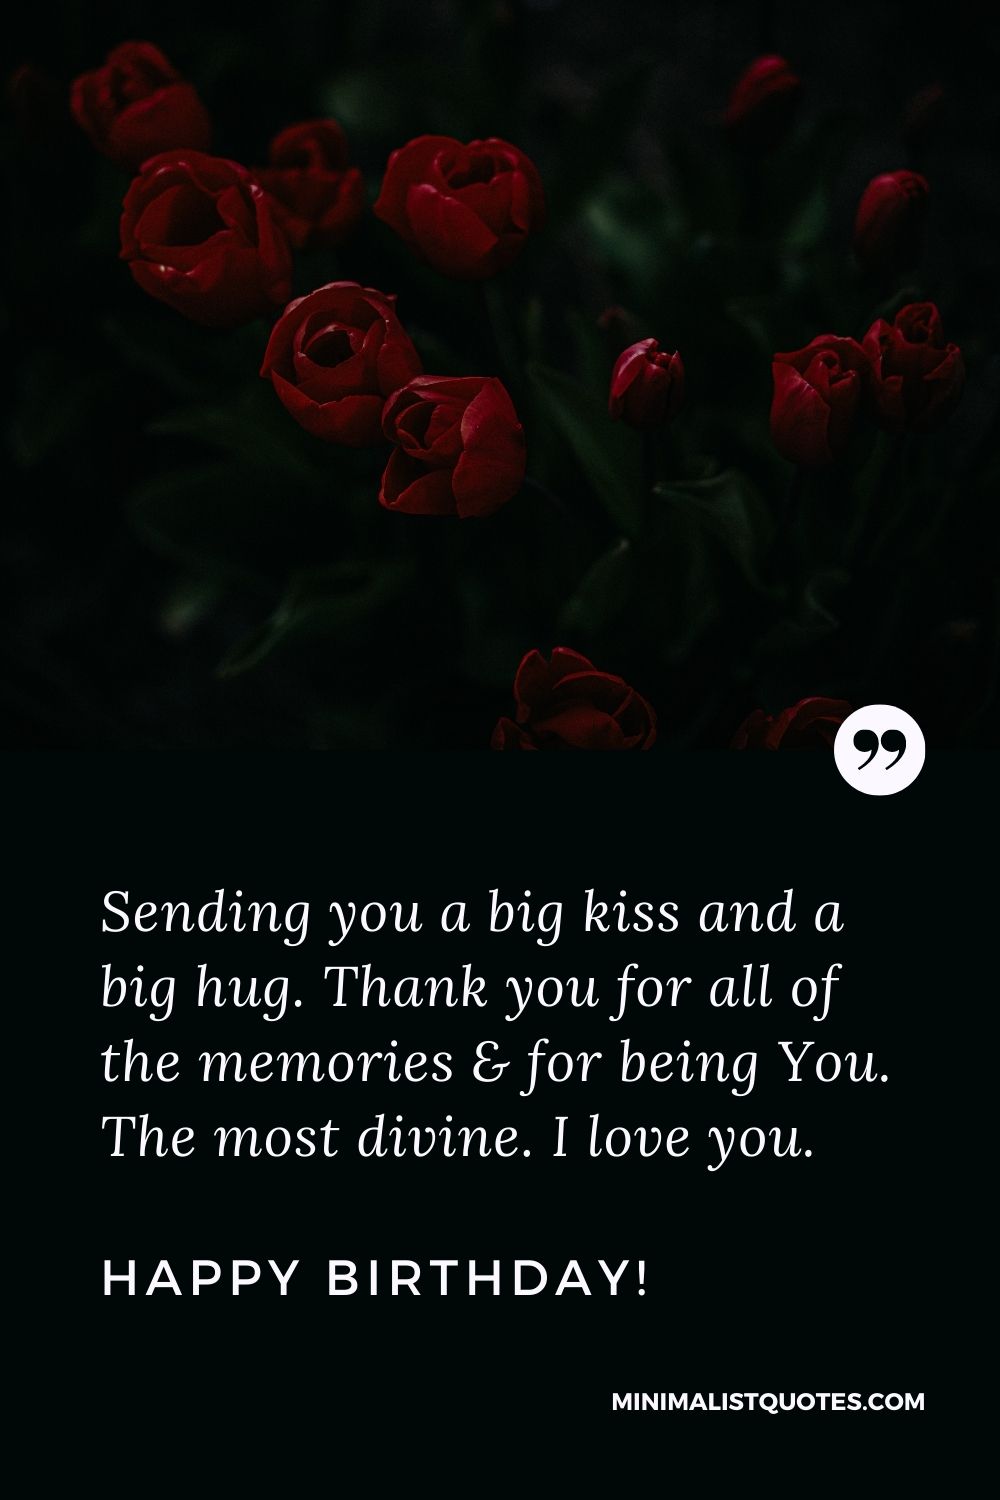 Birthday Quote, Wish & Message With Image: Sending you a big kiss and a big hug. Thank you for all of the memories & for being You. The most divine. I love you. Happy Birthday!